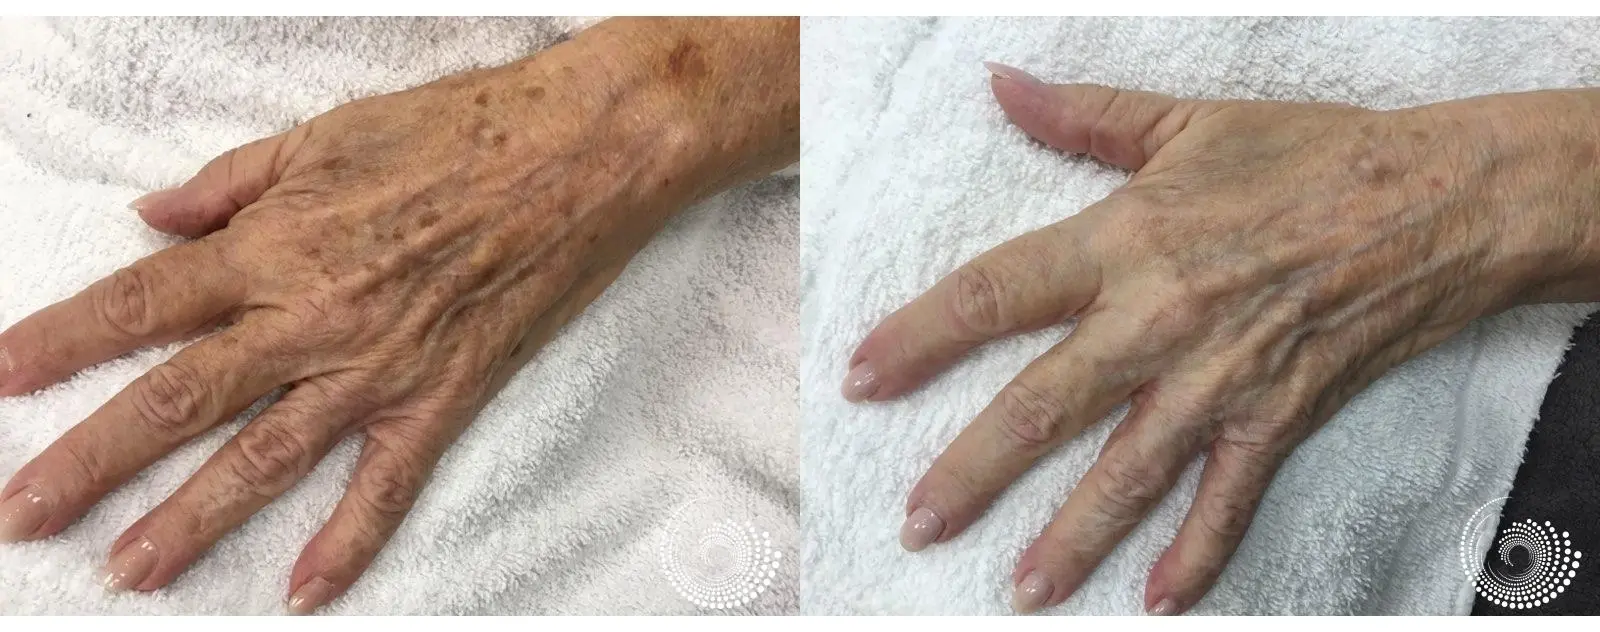 Limelight treats noticeable signs of sun damage on the hands - Before and After